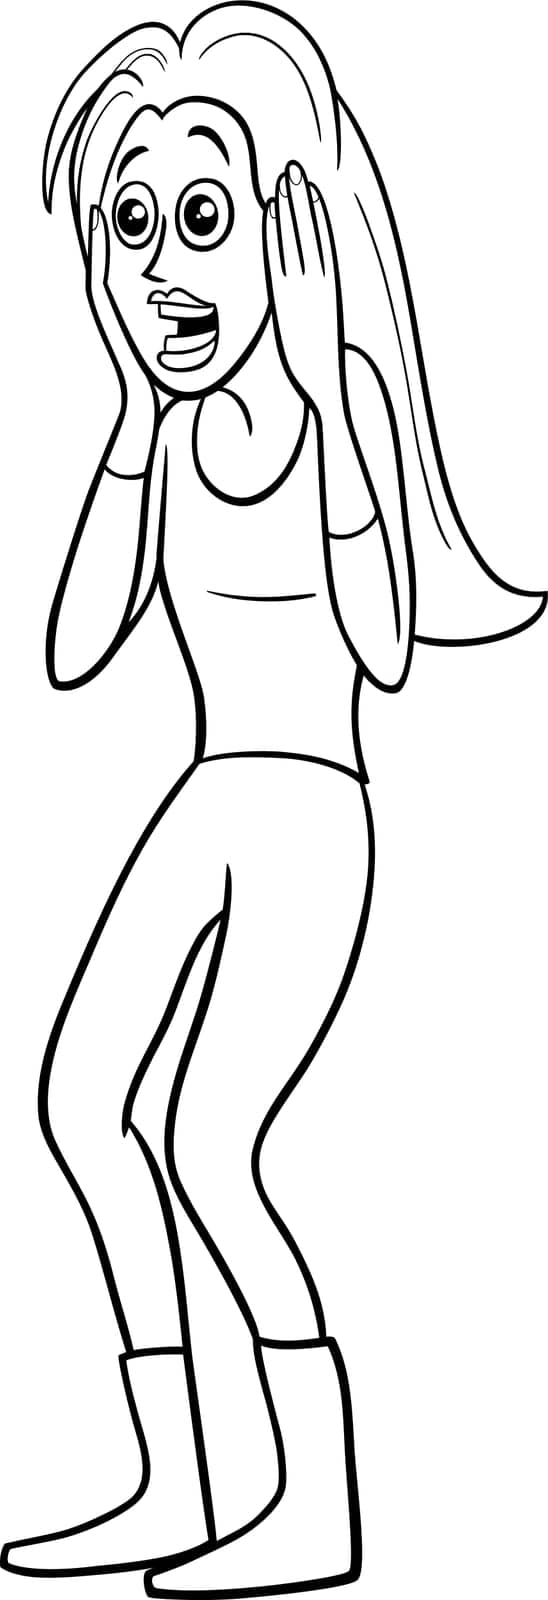 cartoon surprised young woman or girl character coloring page by izakowski